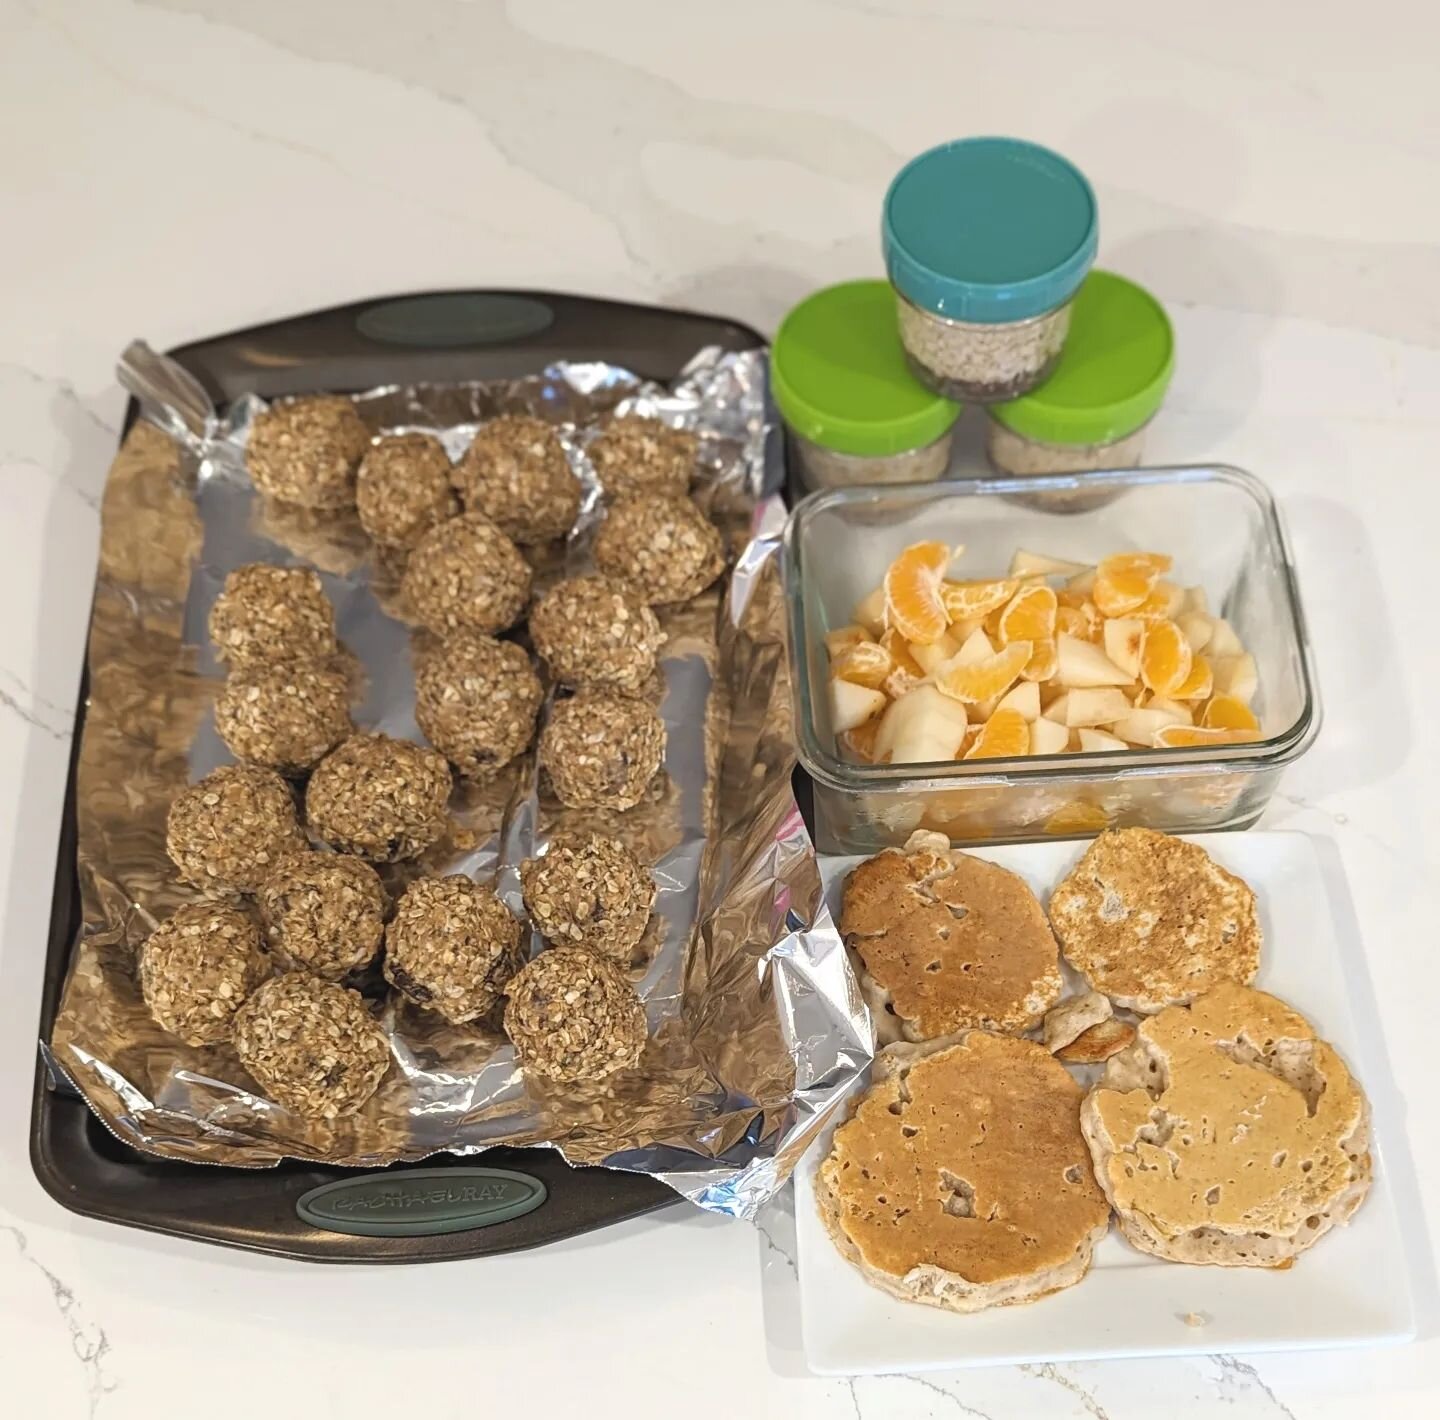 Another food prep day!

Today we had some extra pears left over. So we steamed them up and made some coconut/pear overnight oats and pear/cinnamon pancakes. I also made the fan favorite 'Oat Energy Balls'. They are ALWAYS a hit!

#postpartumdoula #po